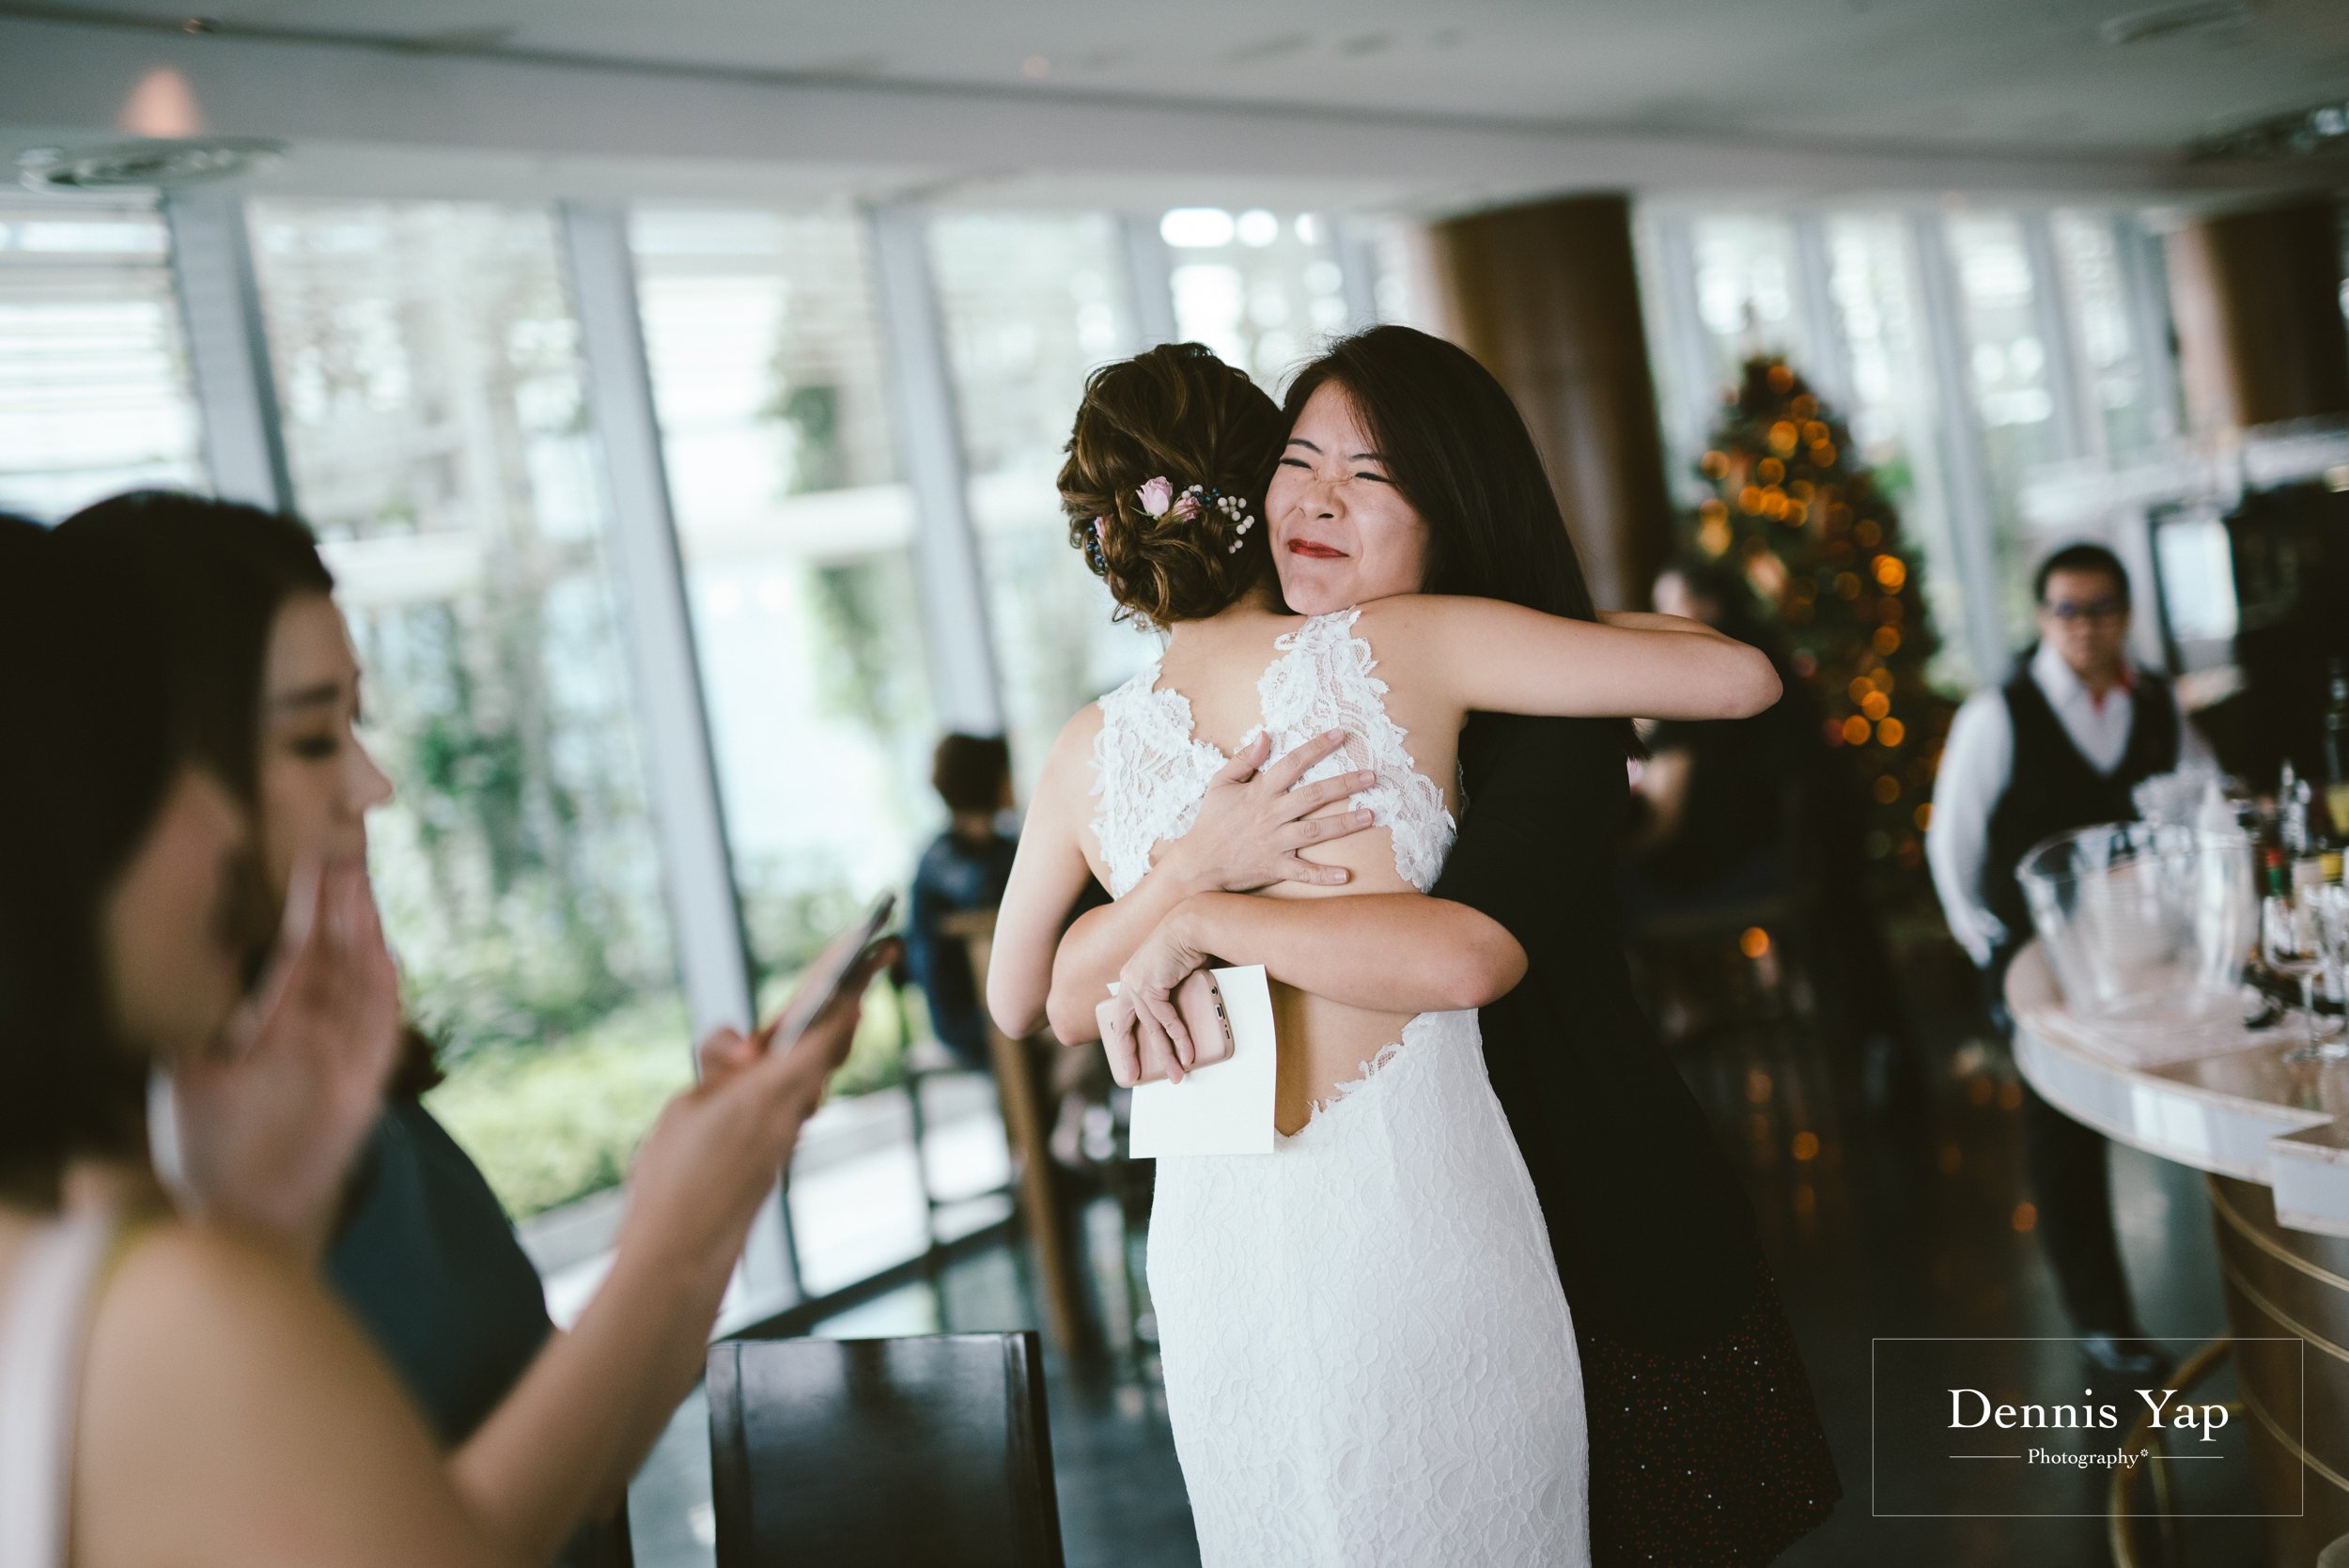 clarence kerlyn registration of marriage in zafferano singapore dennis yap photography malaysia top wedding photographer-6.jpg